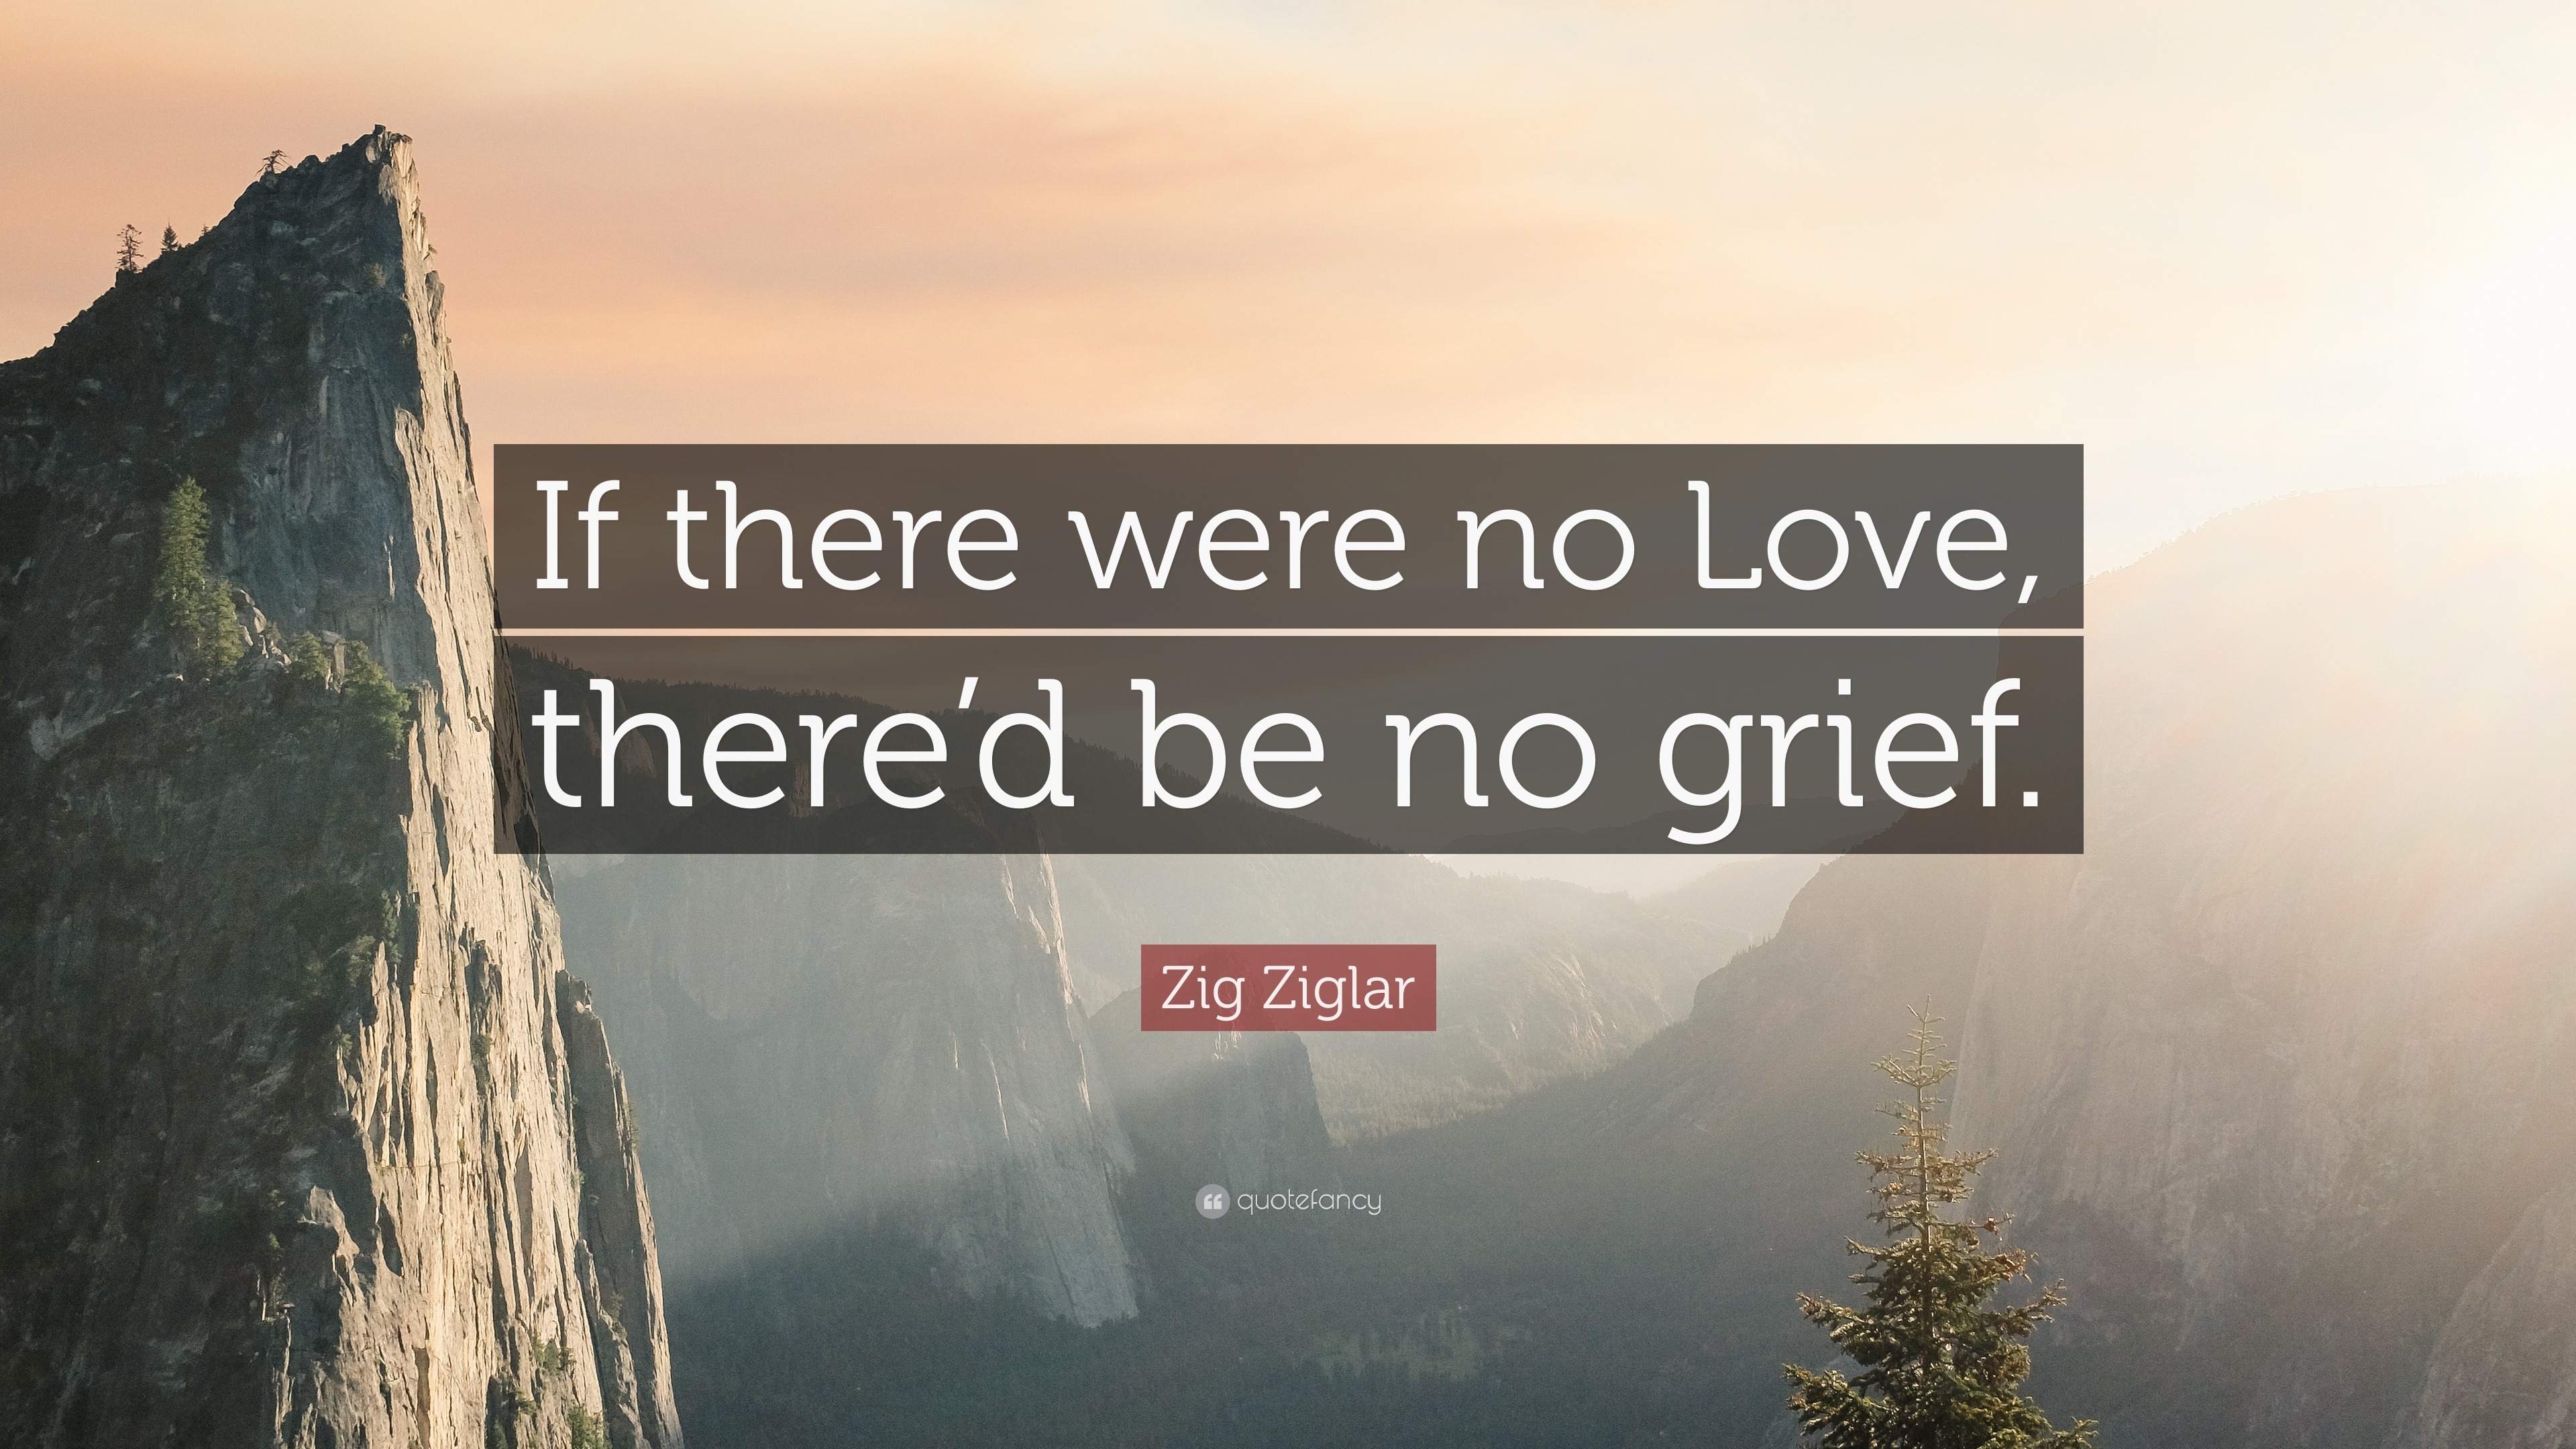 Zig Ziglar Quote “If there were no Love there d be no